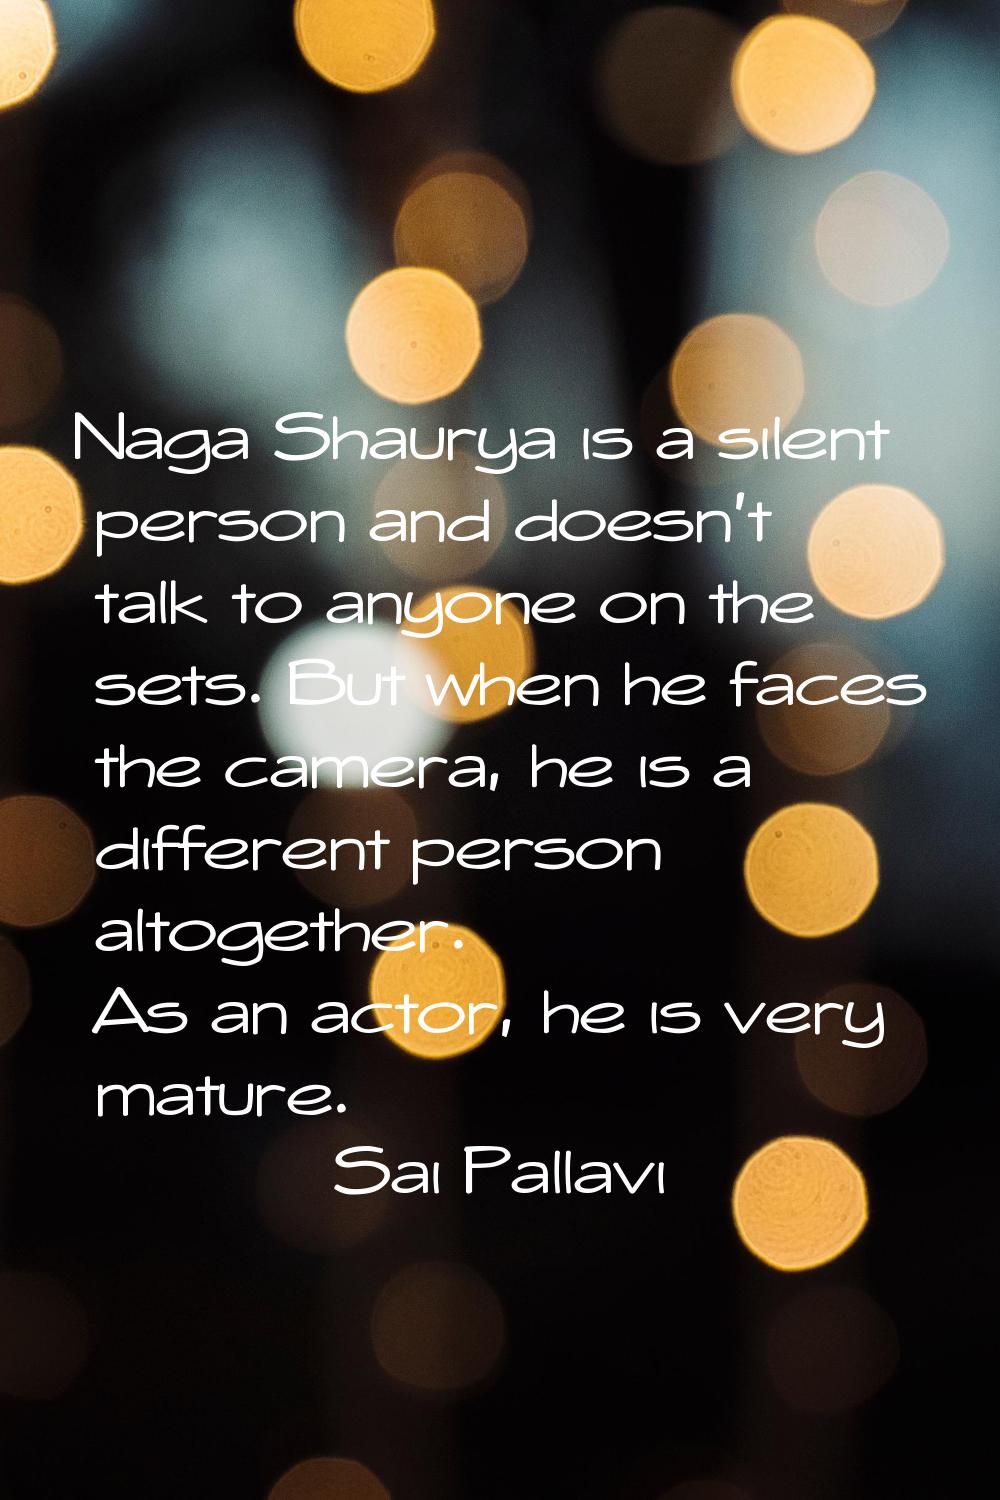 Naga Shaurya is a silent person and doesn't talk to anyone on the sets. But when he faces the camer